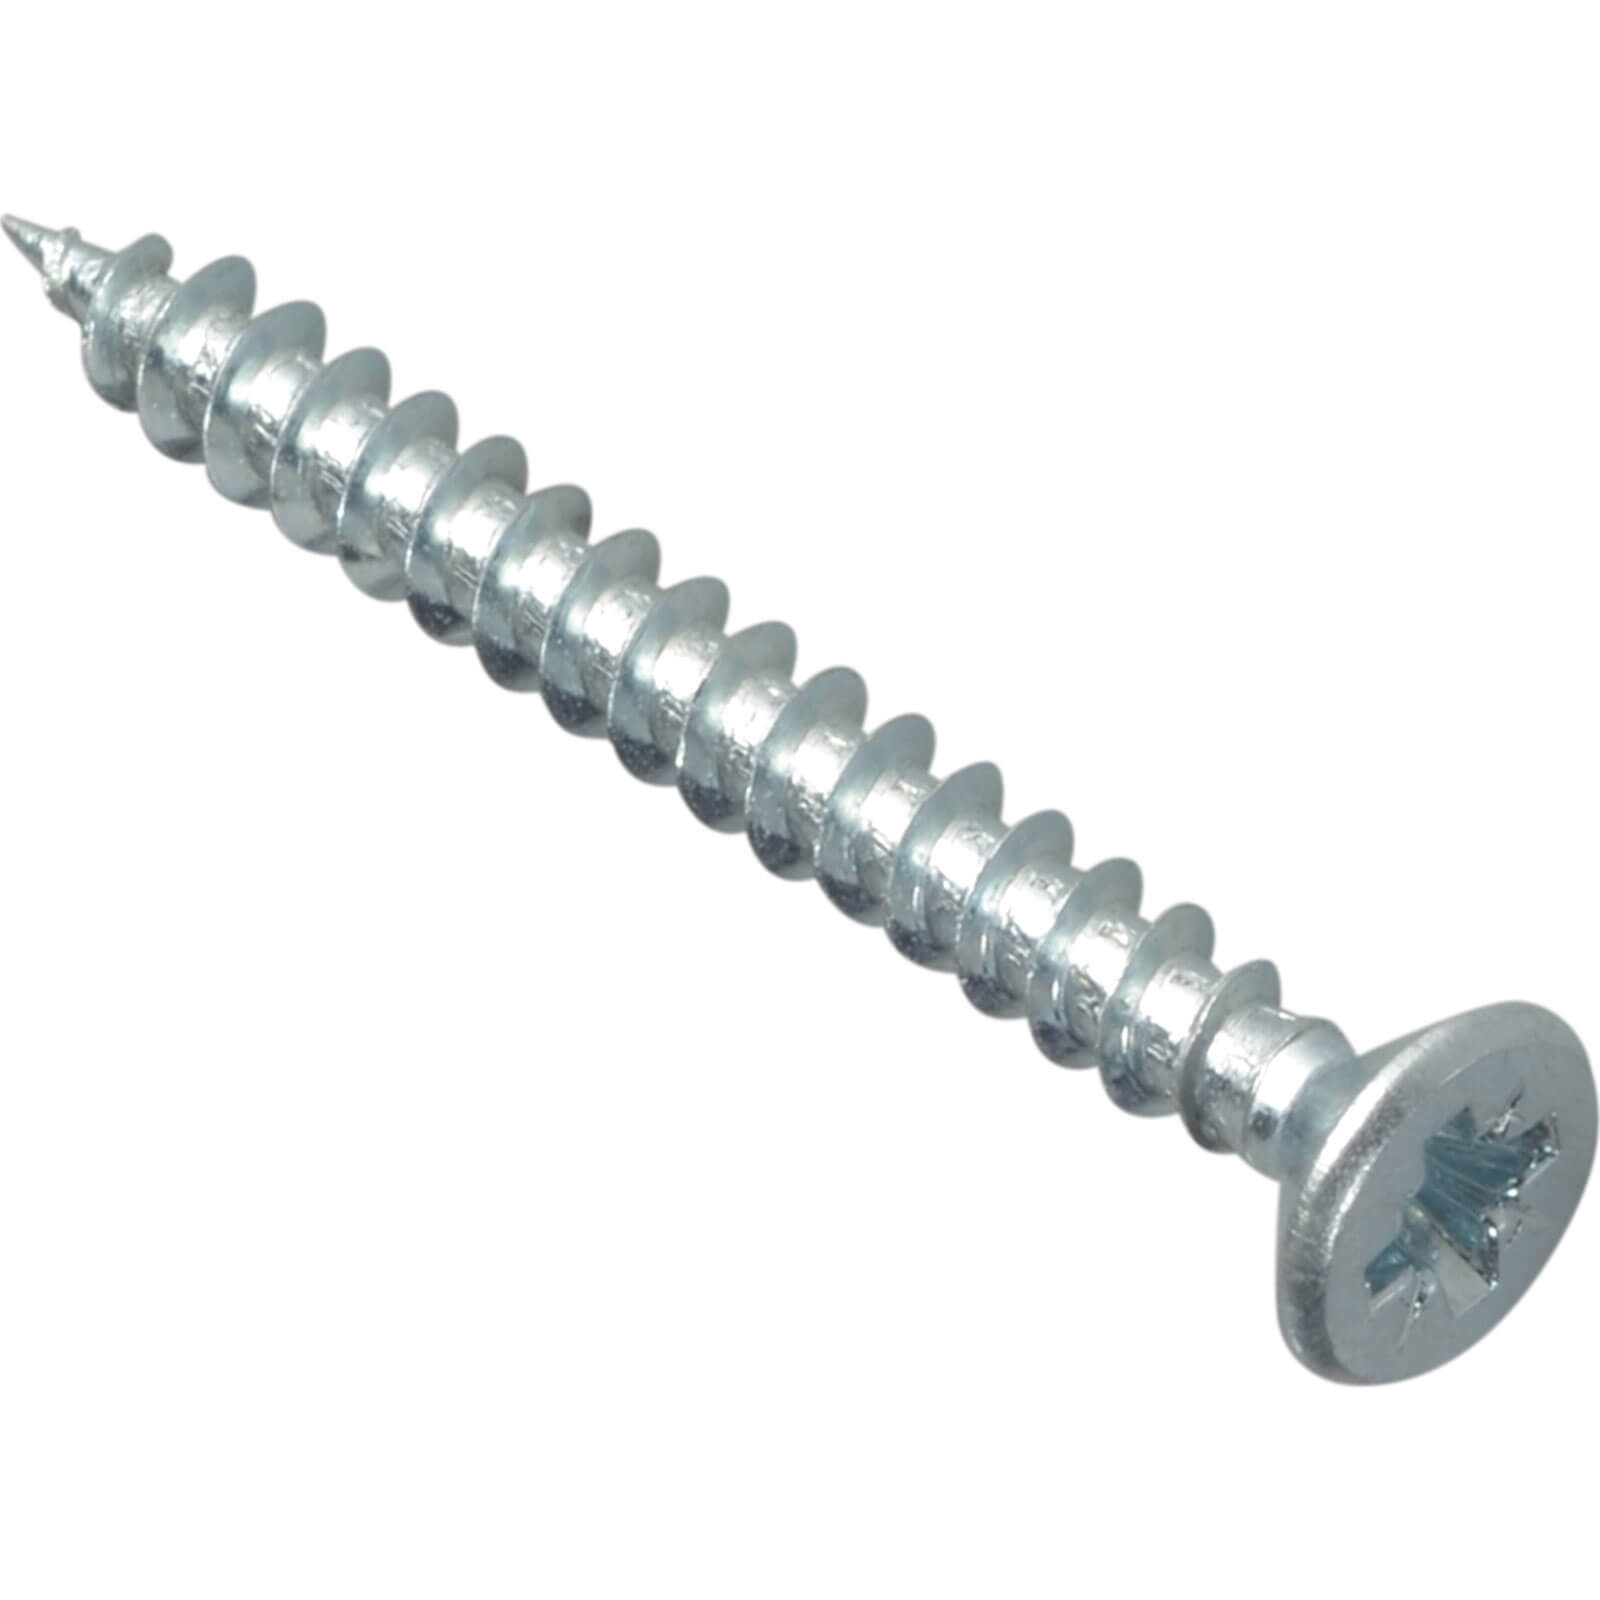 Image of Forgefix Multi Purpose Zinc Plated Screws 4mm 40mm Pack of 20